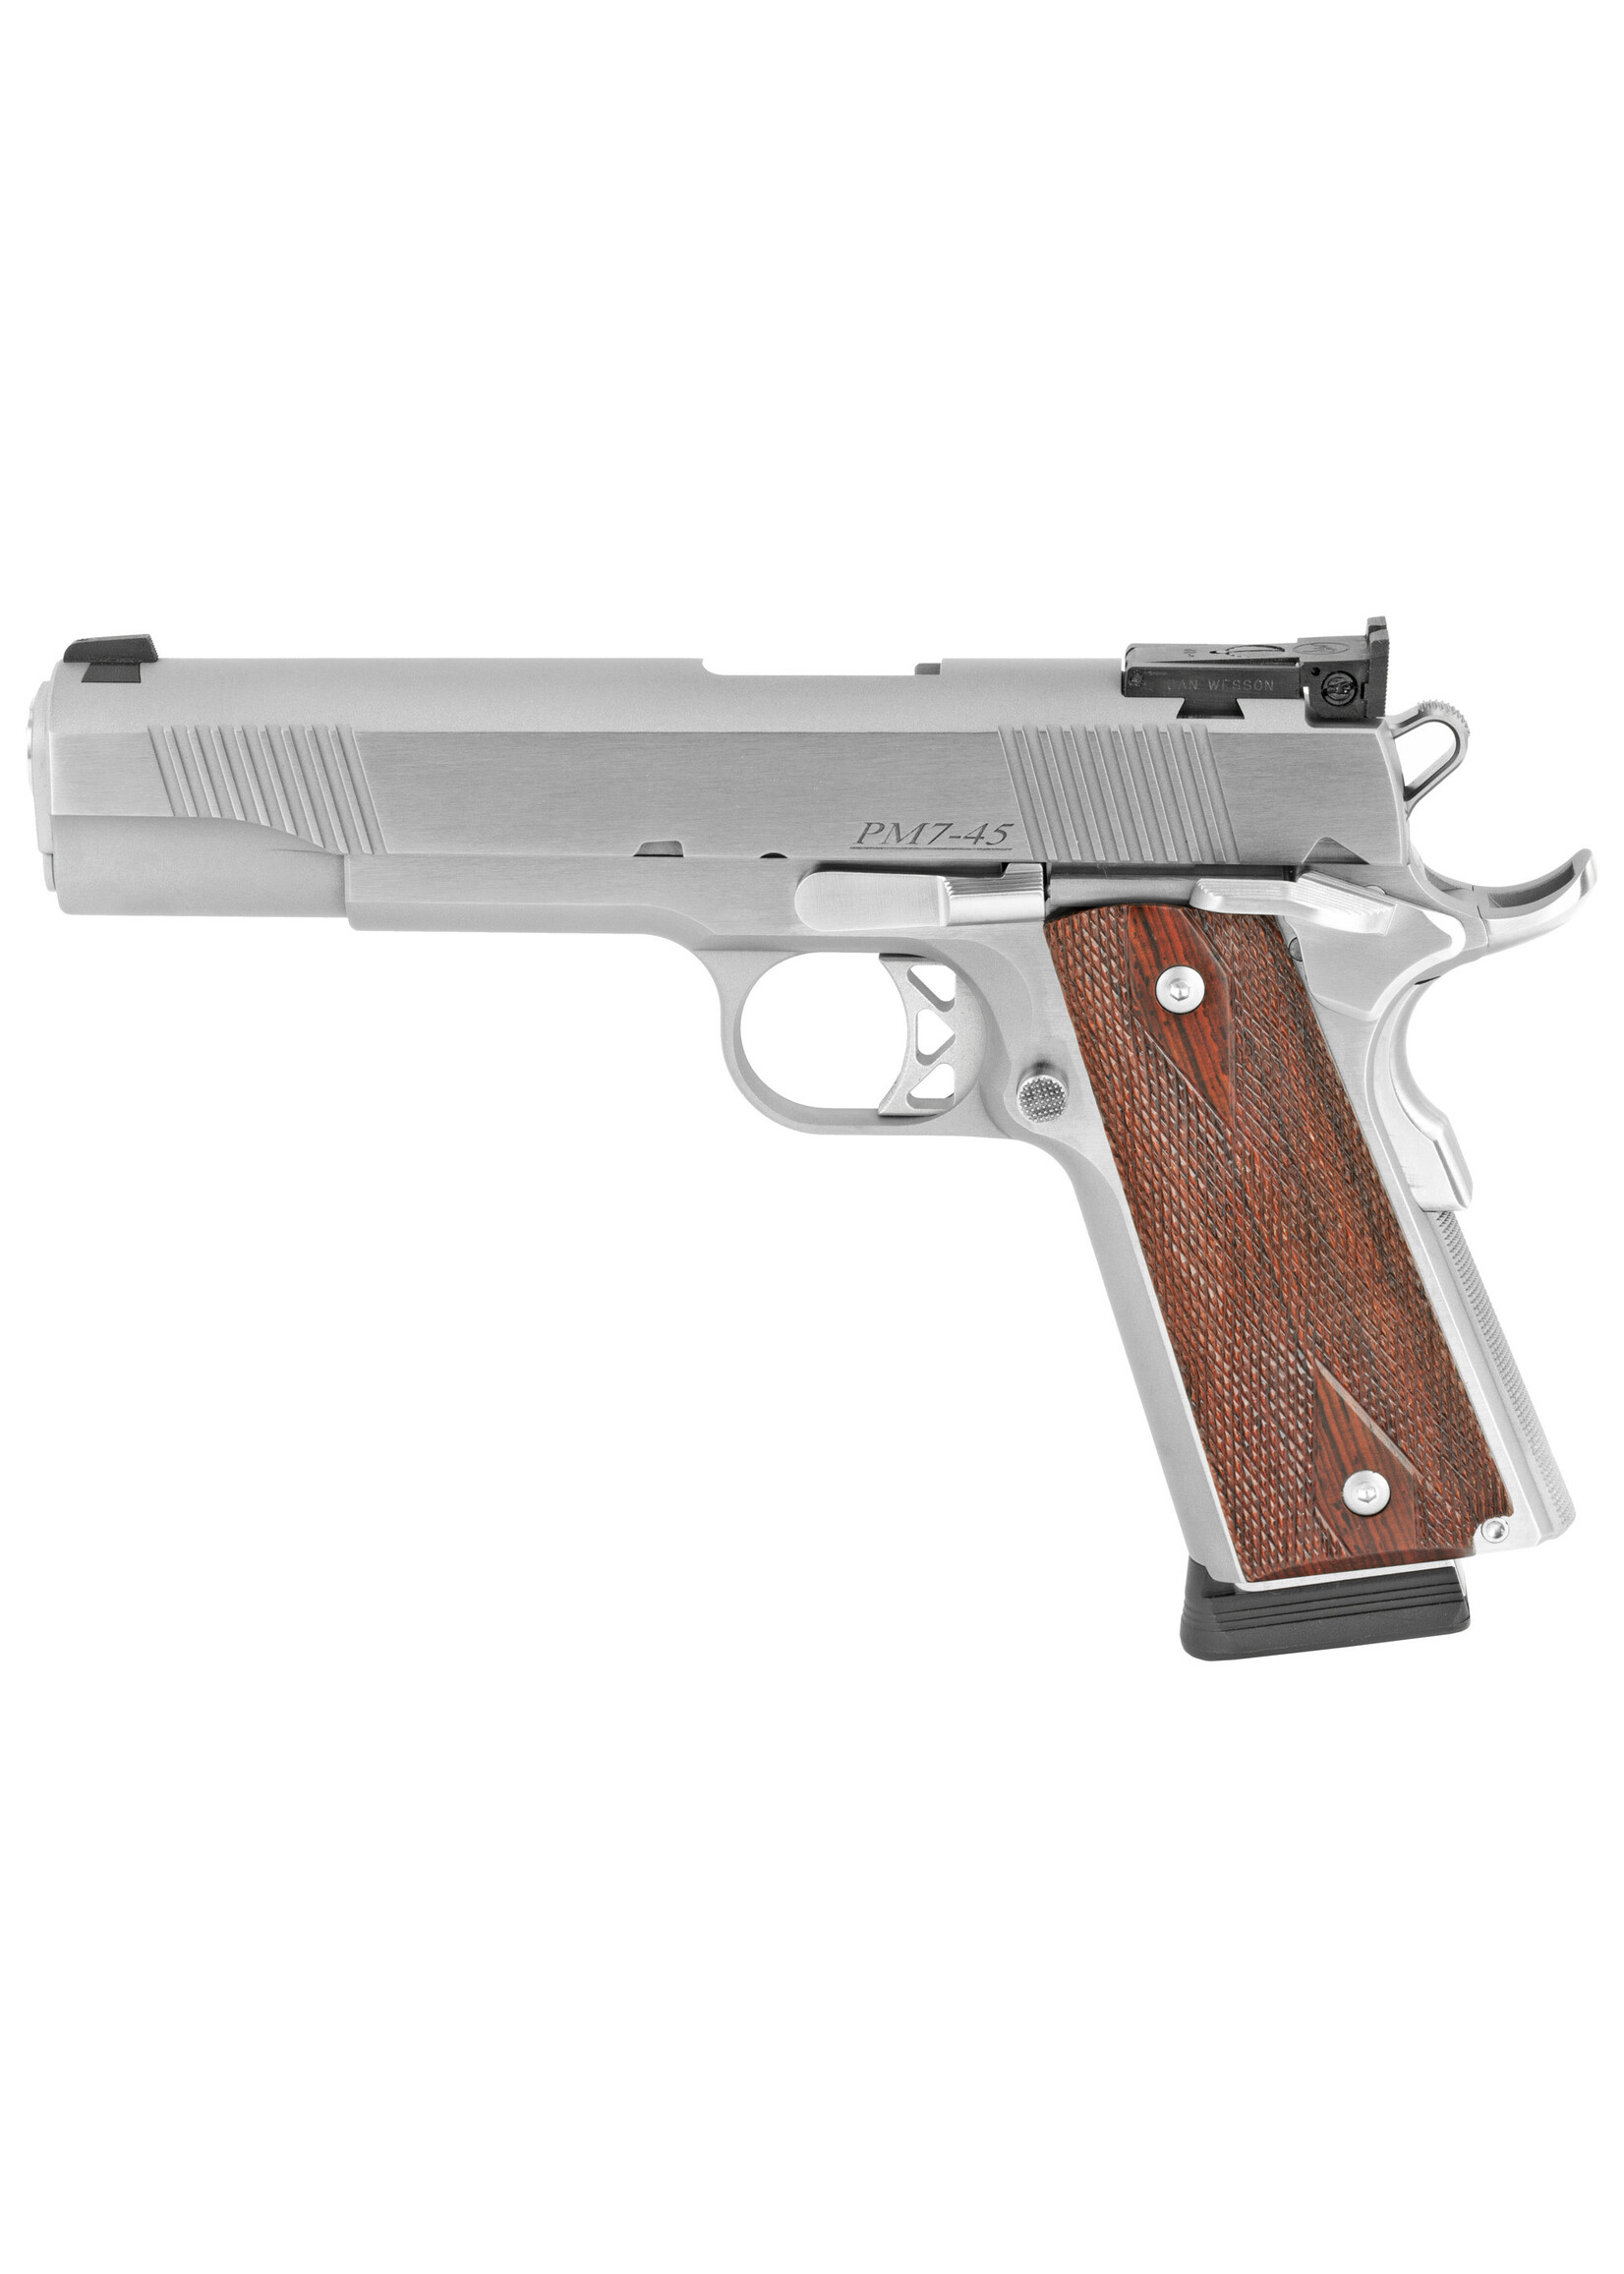 CZ USA / Dan Wesson Dan Wesson, Pointman Seven, Full Size, 45ACP, 5" Barrel, Steel Frame, Stainless Finish, Wood Grips, Adjustable Sights, 8Rd, 2 Magazines, CA Approved